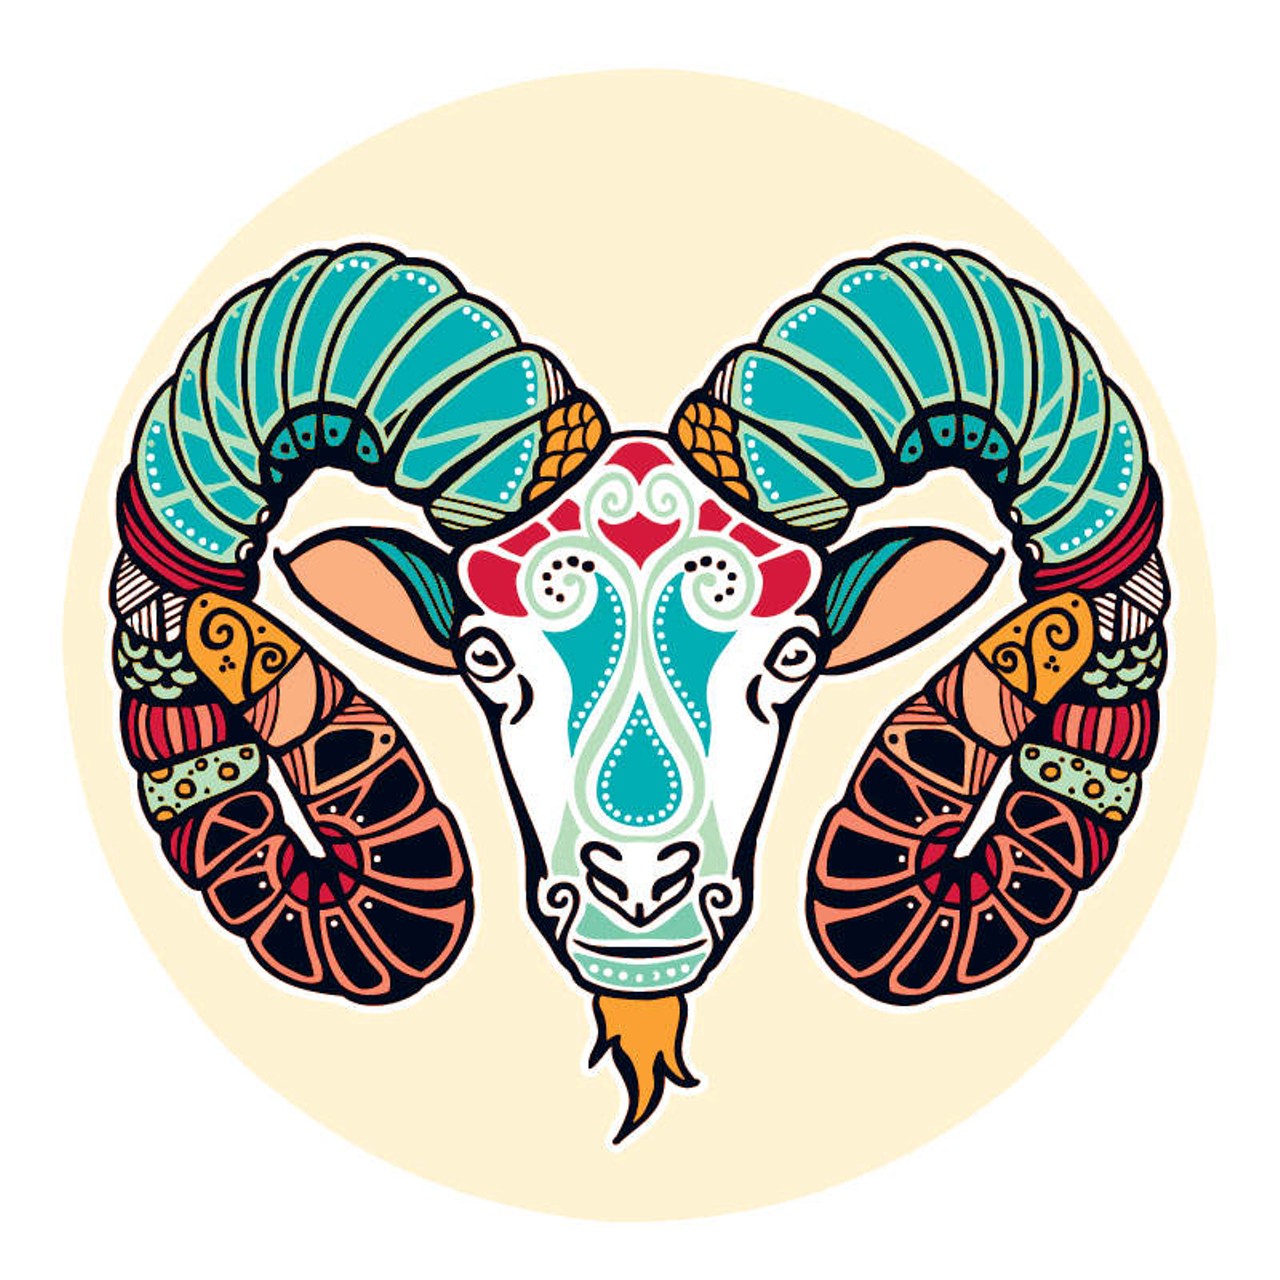 ARIES&nbsp;(March 21- April 20): 
On the verge of one of those peak moments, you are faced with your own mortality, or some other aspect of the hand of fate. For someone who has always felt as if they have everything under control, you are humbled by all of this. Some of you could be stressed by the weight of uncertainty. In any dark night of the soul it helps to remember that the deeper you are willing to go, the brighter your light shines. Don't fall prey to your fears. Keeping the faith and knowing that life is one lesson after another is the key to finding the light at the end of the tunnel.